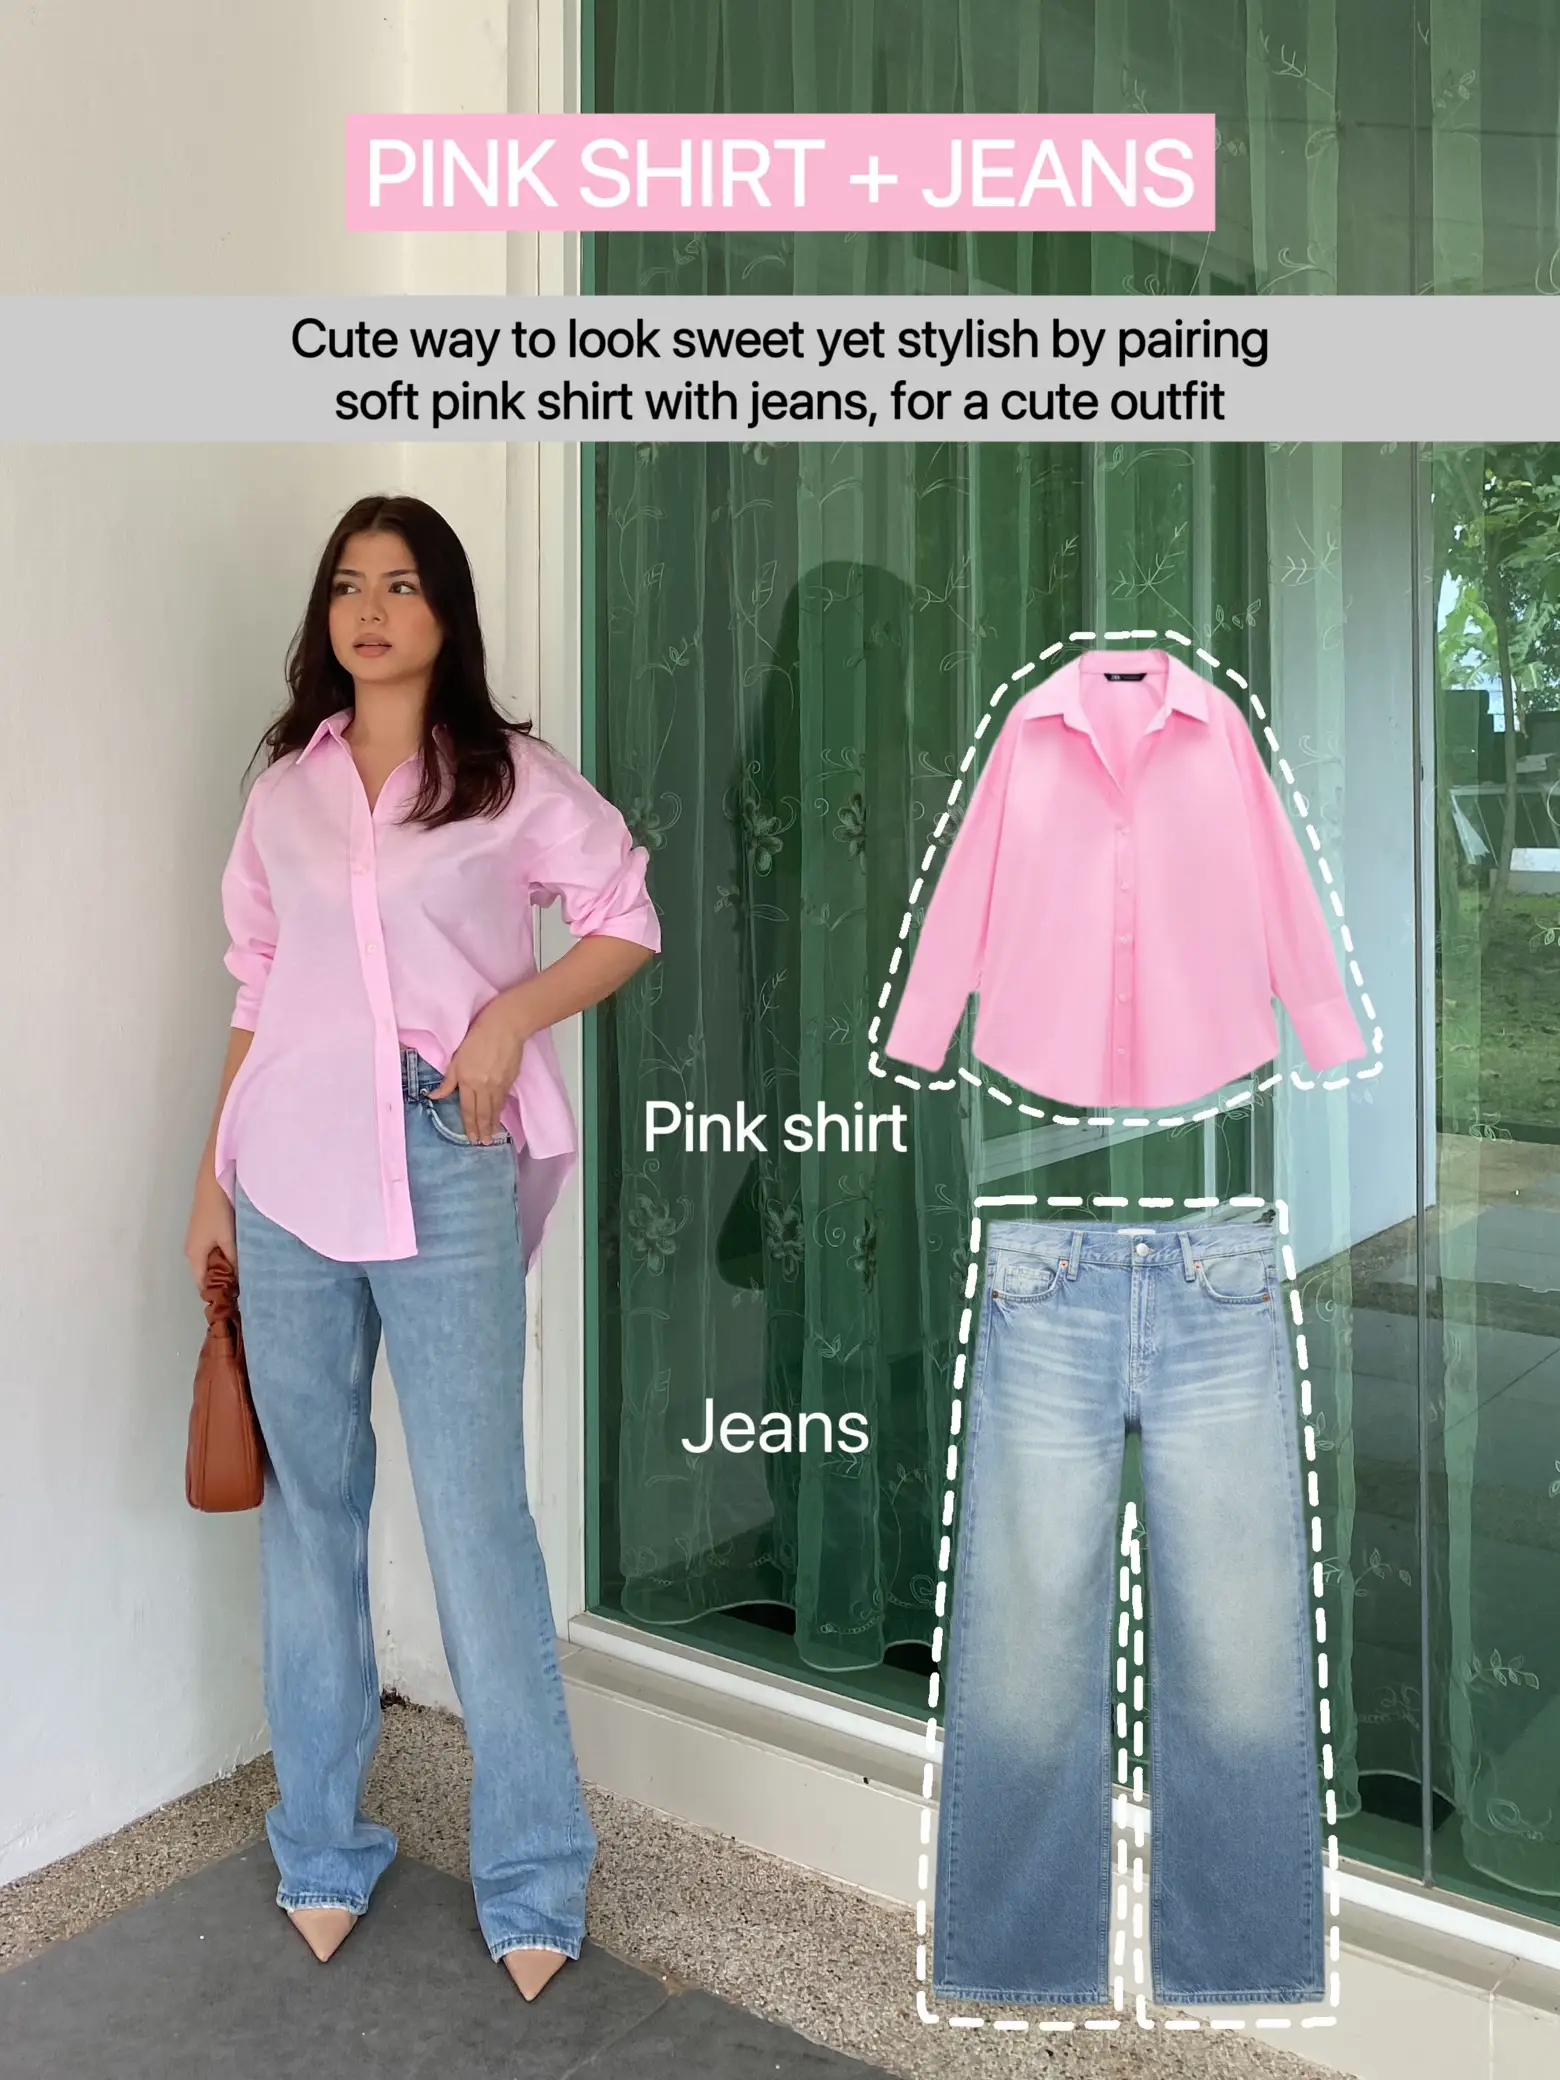 How to Look Good in Jeans and a TShirt